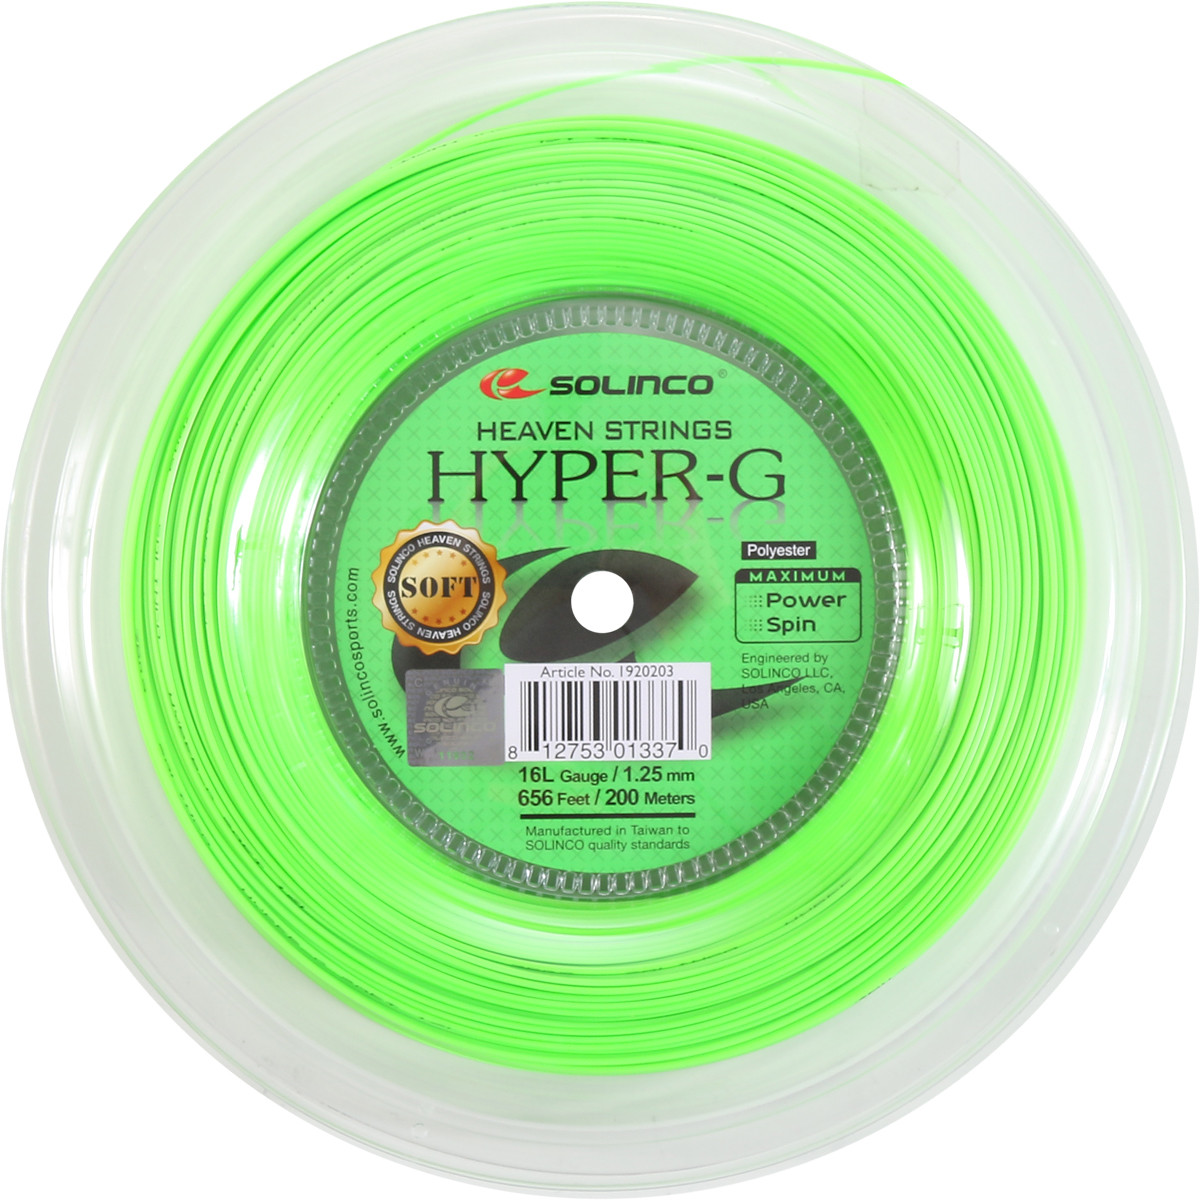 Solinco Hyper-G Soft 16L String Reel - 656' : : Sports &  Outdoors